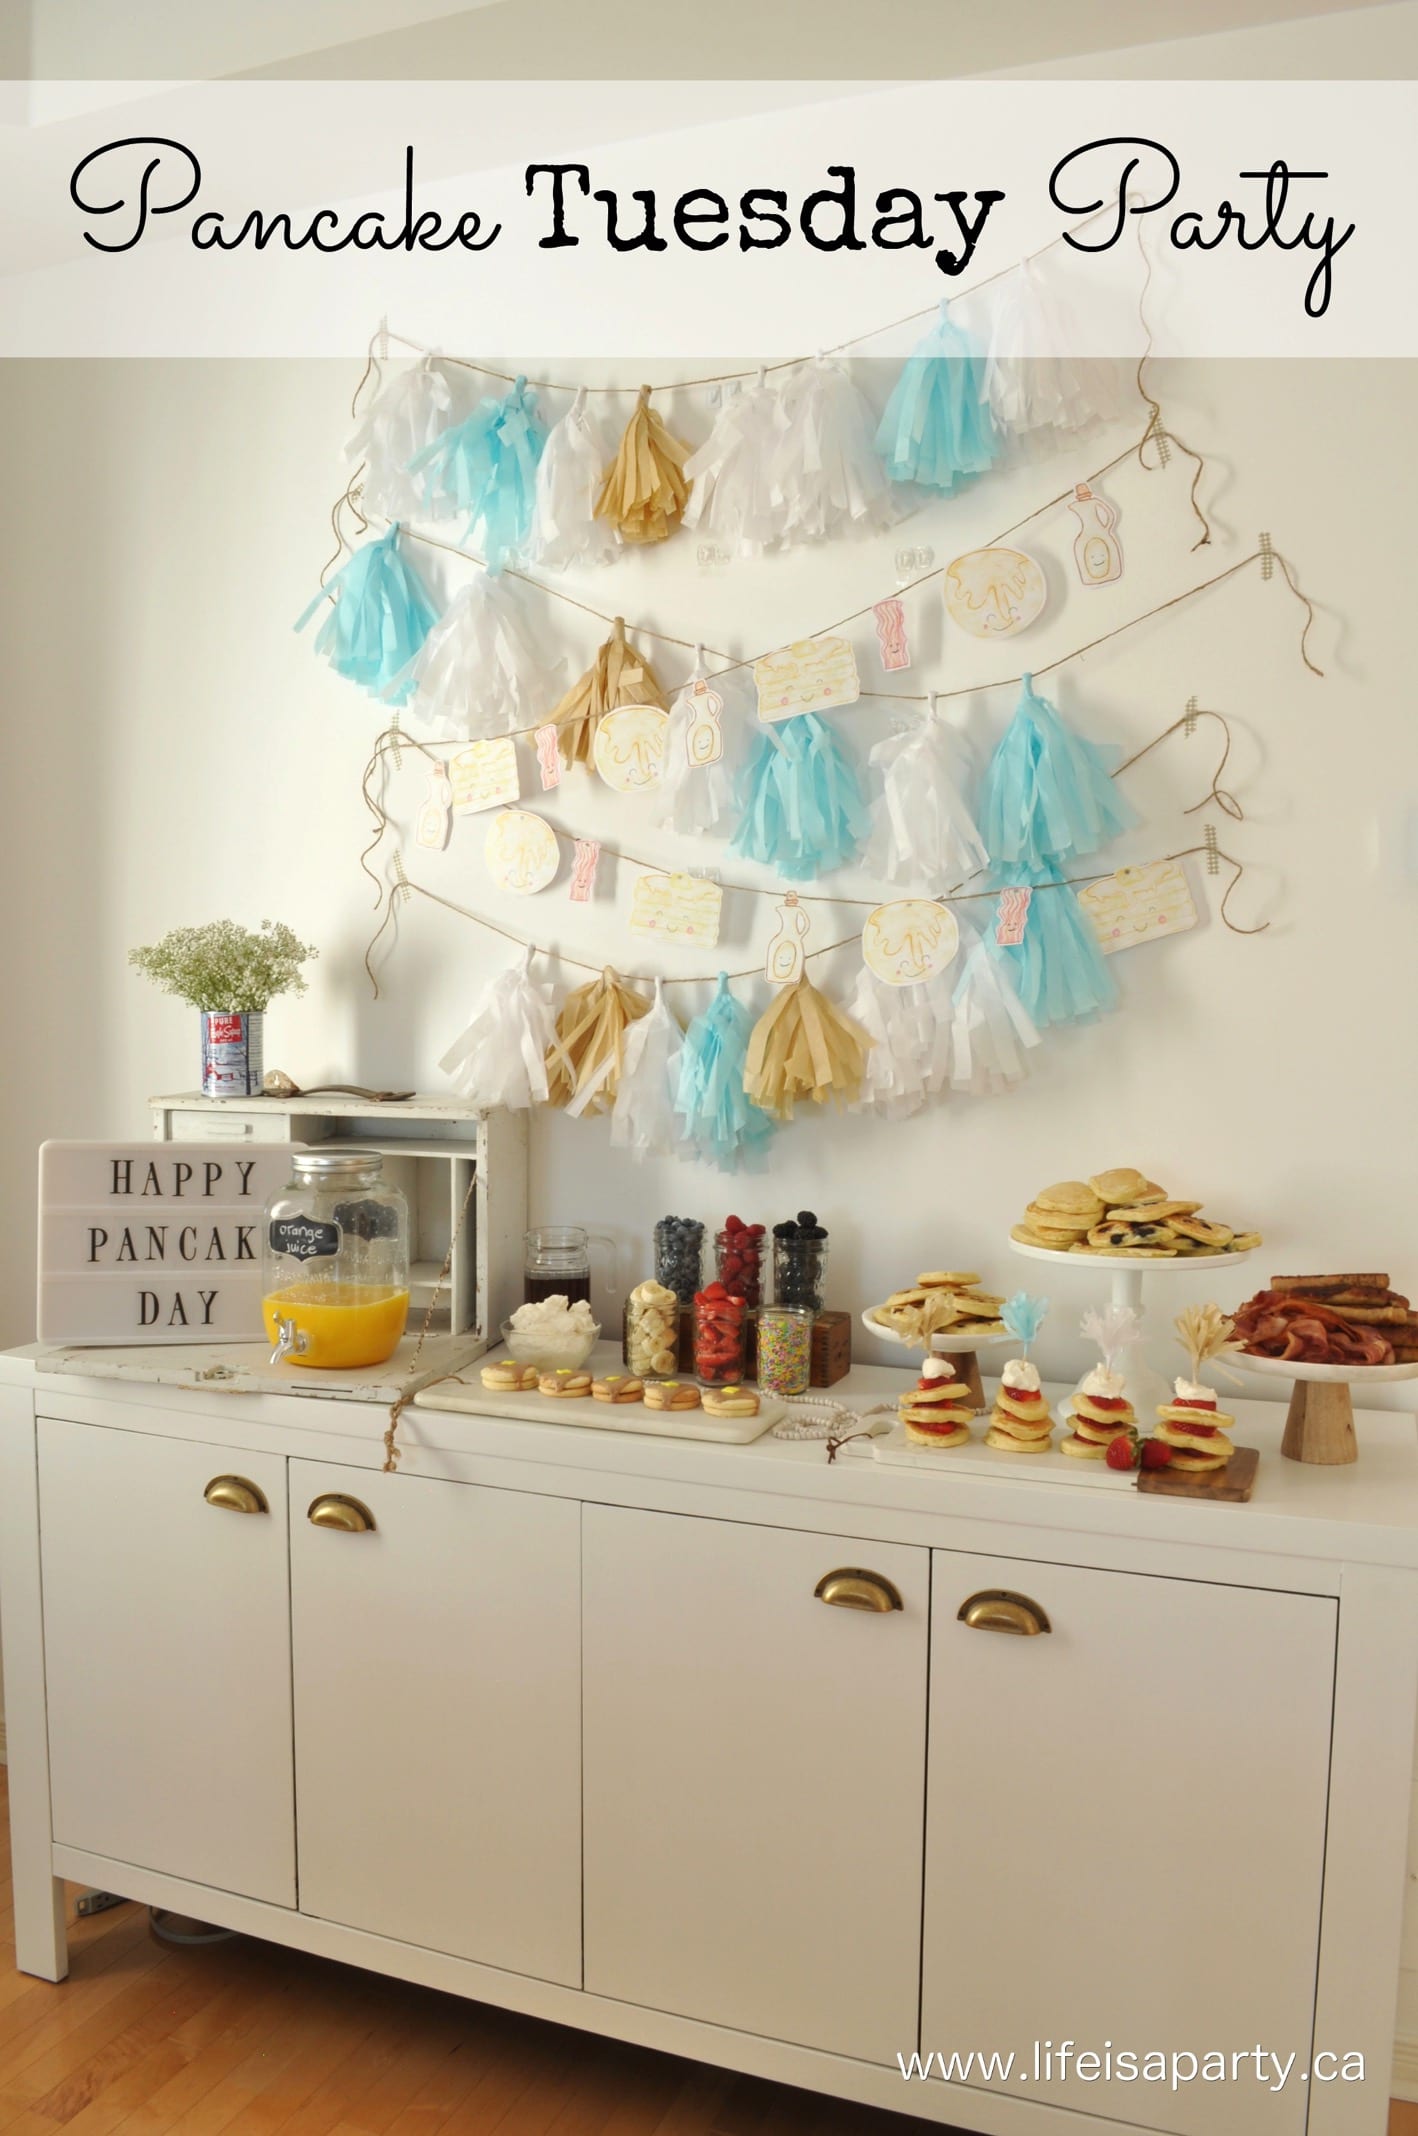 Pancake Tuesday Party: Free pancake printable decorations, invite, and pancake jokes, and a pancake buffet with topping ideas.